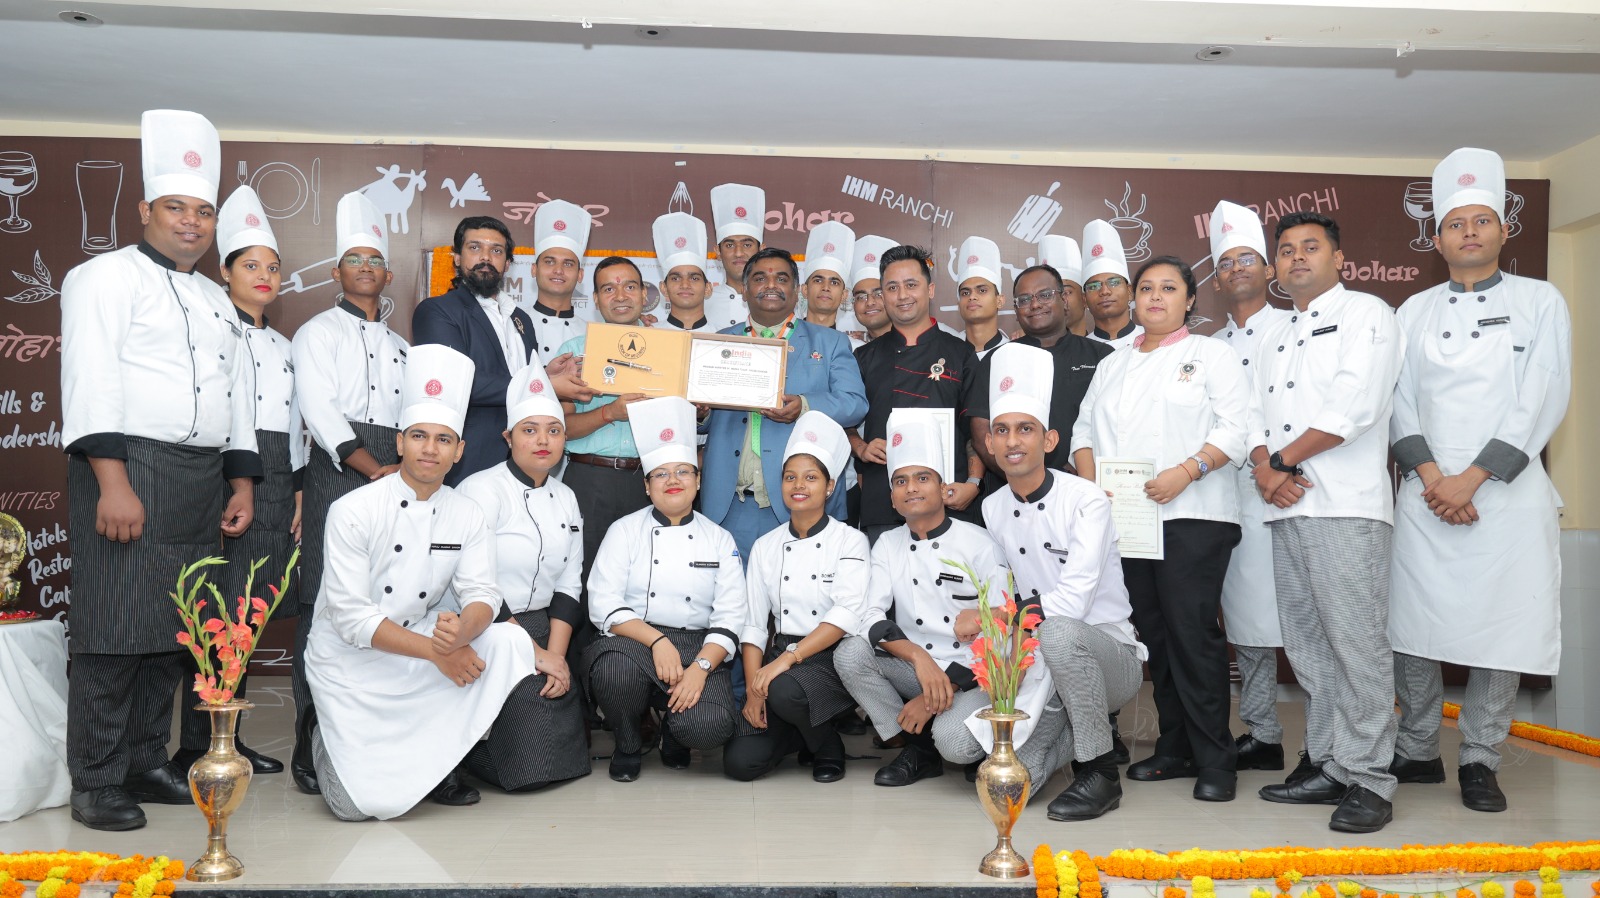 IHM Ranchi claim consecutive spot in “India Book of Records 2023” on World Tourism Day